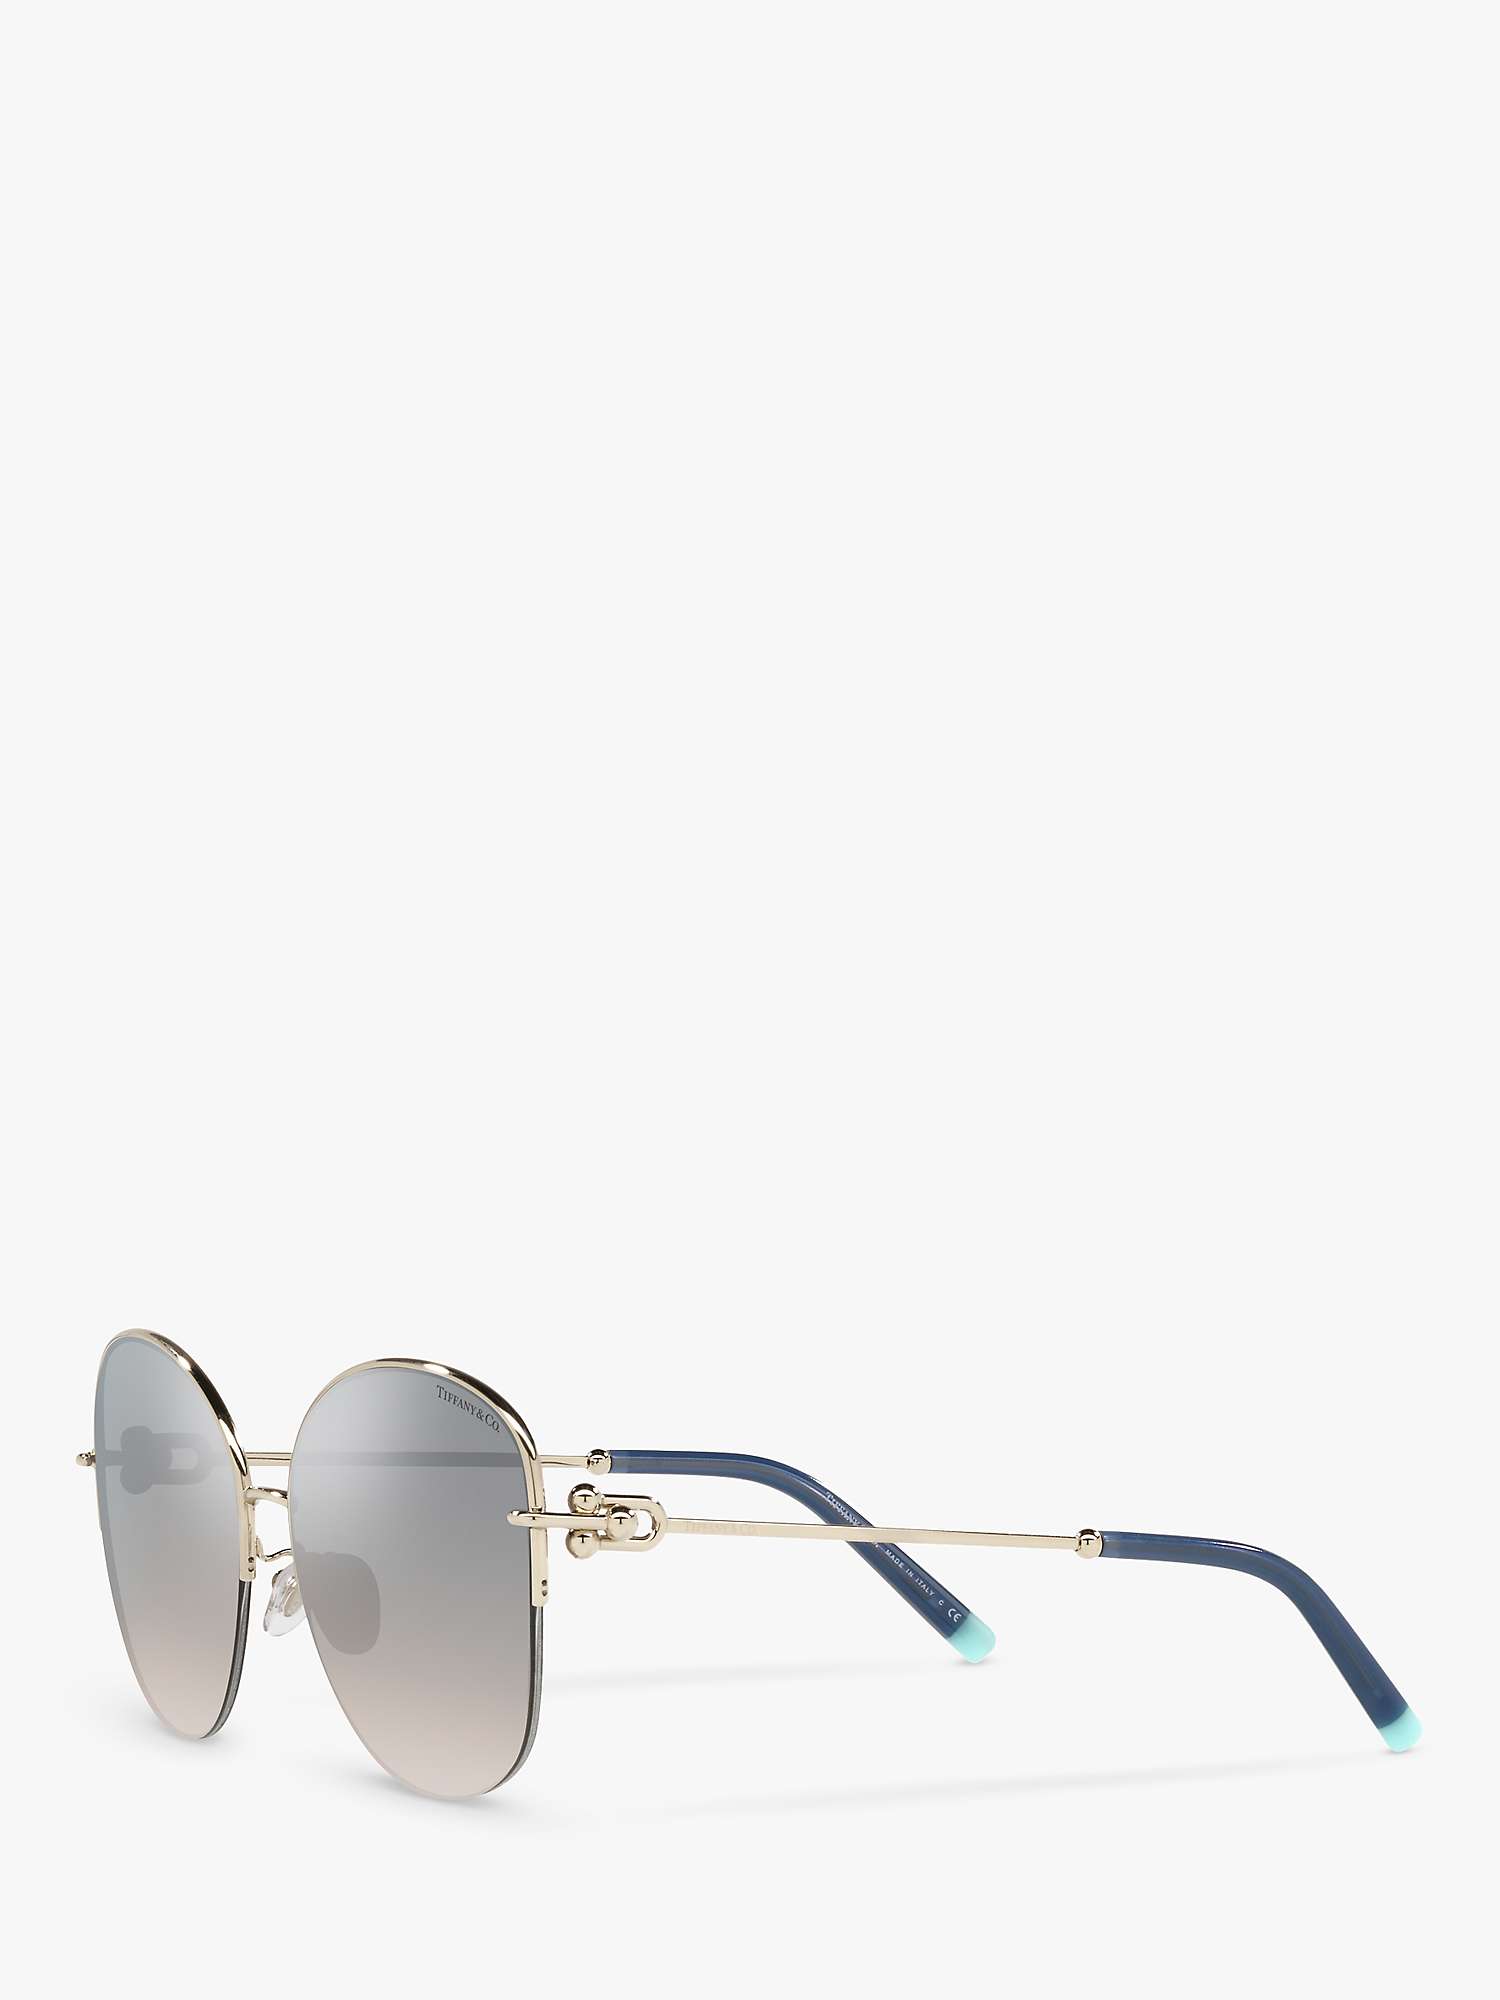 Buy Tiffany & Co TF3082 Women's Pillow Shape Sunglasses, Pale Gold/Blue Mirror Online at johnlewis.com